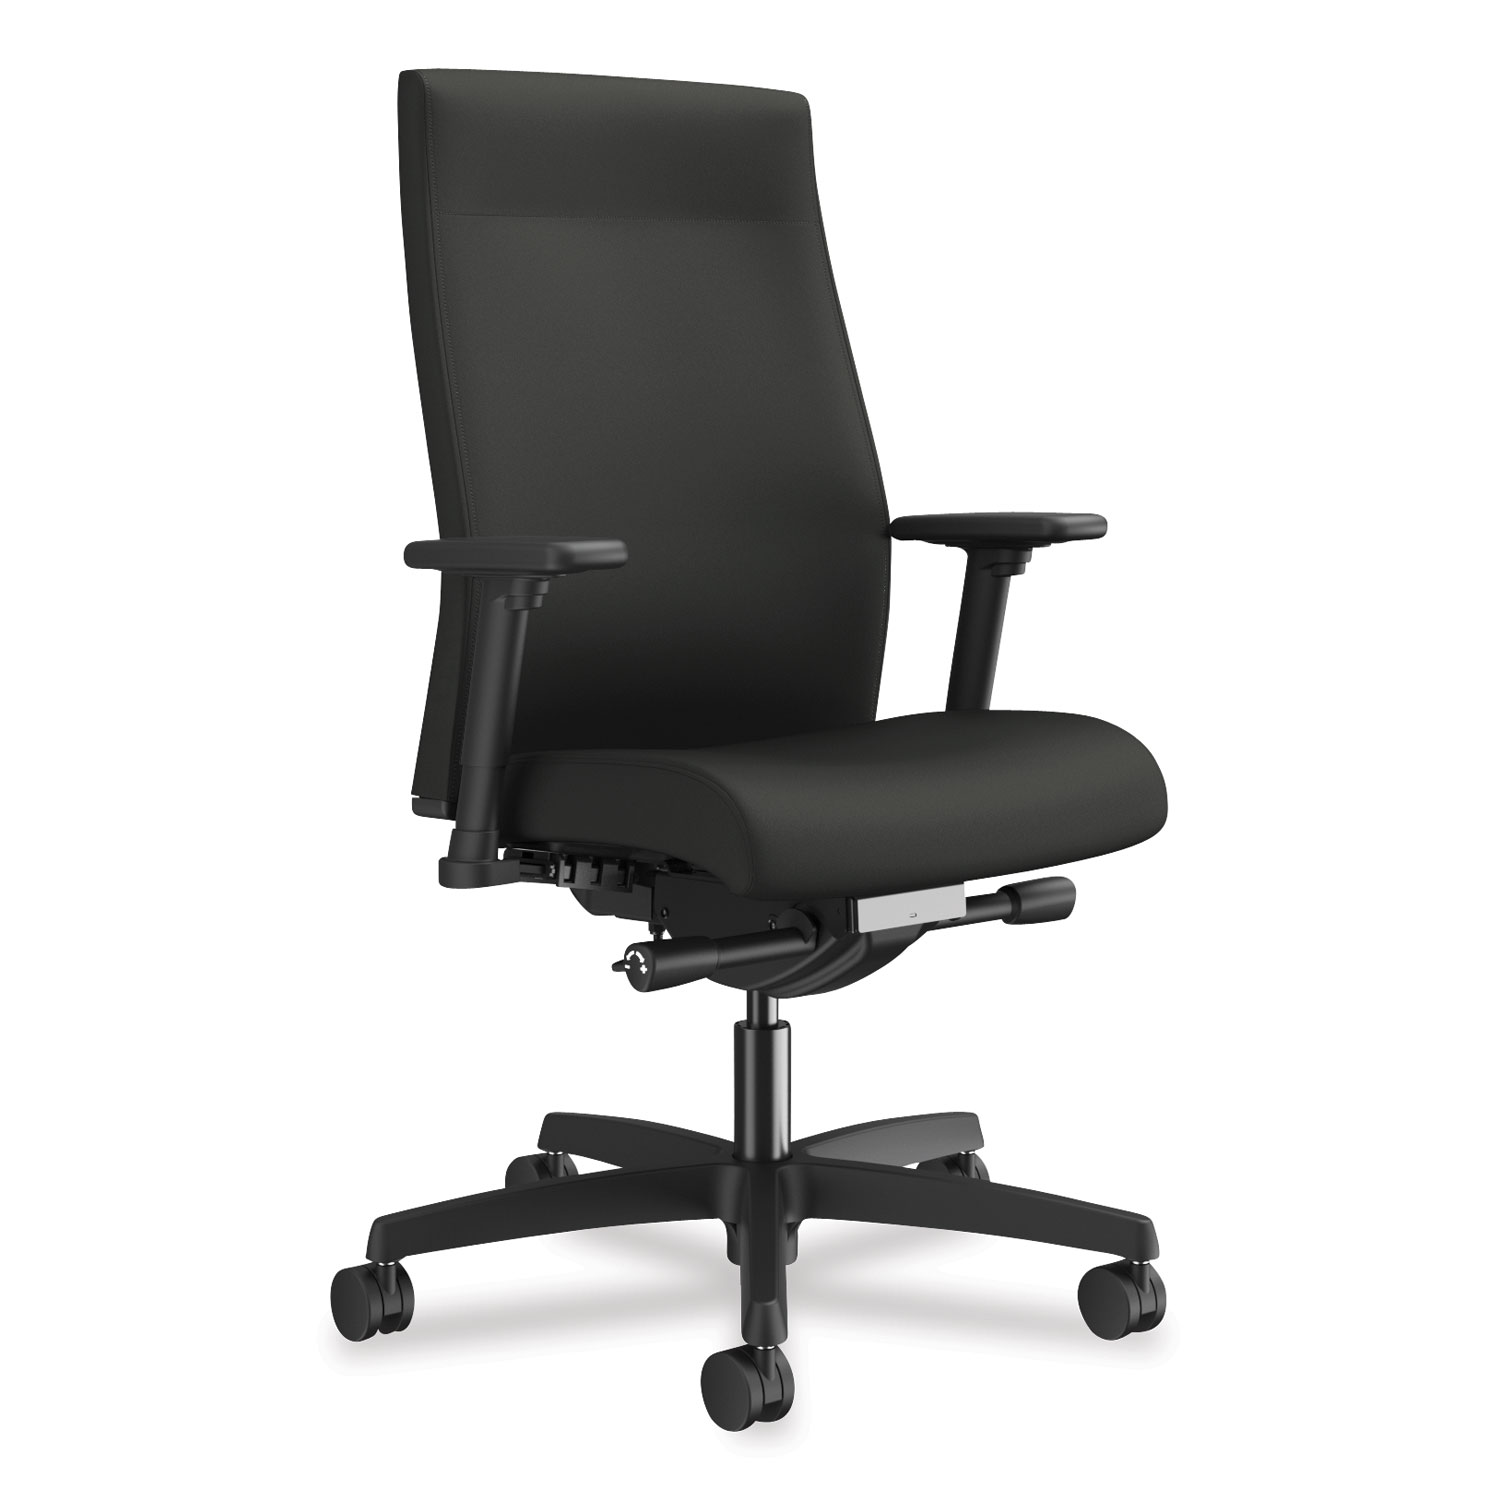  HON HONI2UL2AC19TK Ignition 2.0 Upholstered Mid-Back Task Chair With Lumbar, Supports up to 300 lbs., Iron Ore Seat, Iron Ore Back, Black Base (HONI2UL2AC19TK) 